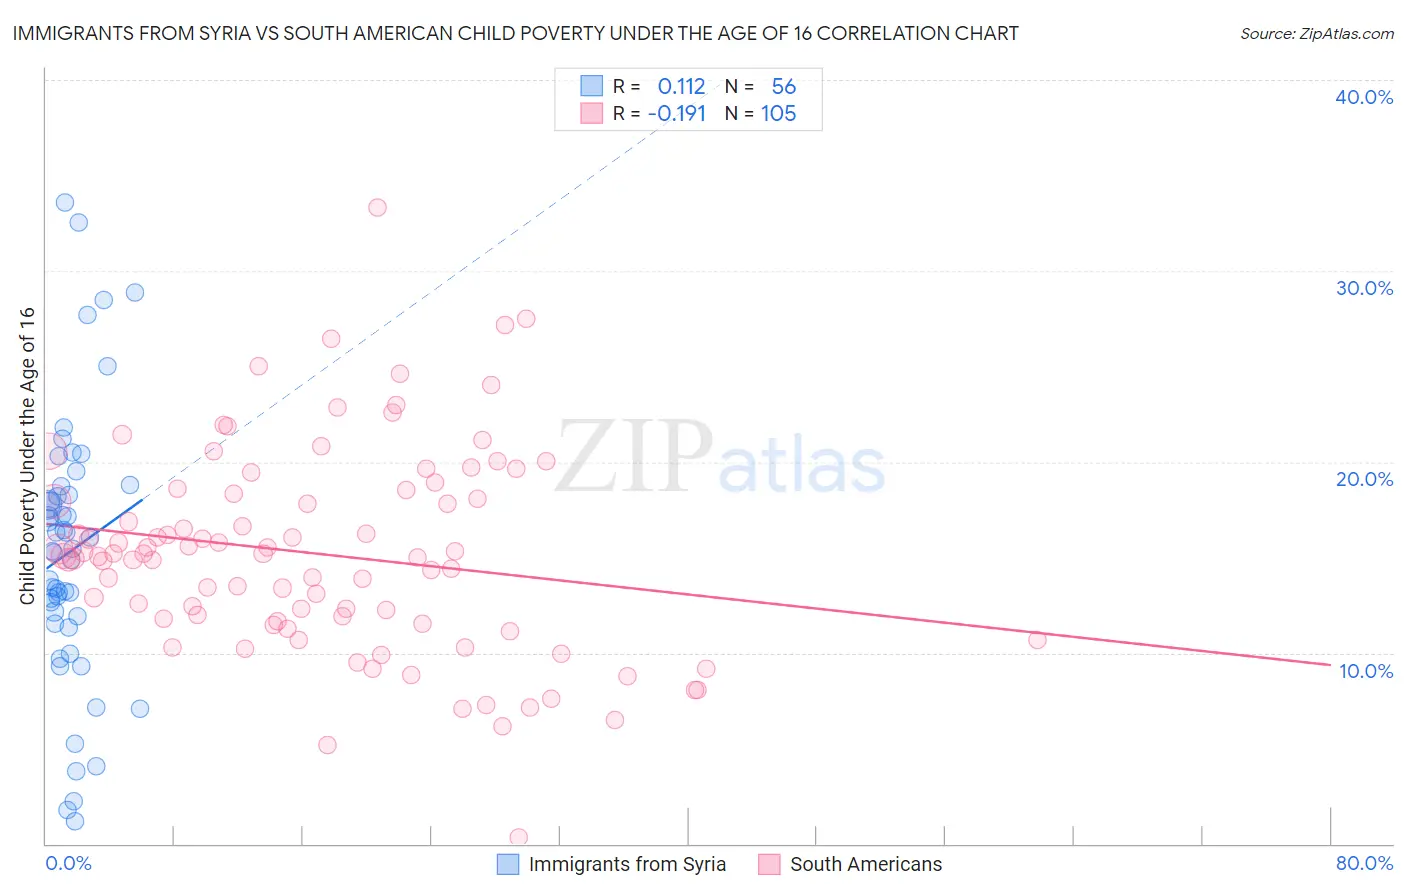 Immigrants from Syria vs South American Child Poverty Under the Age of 16